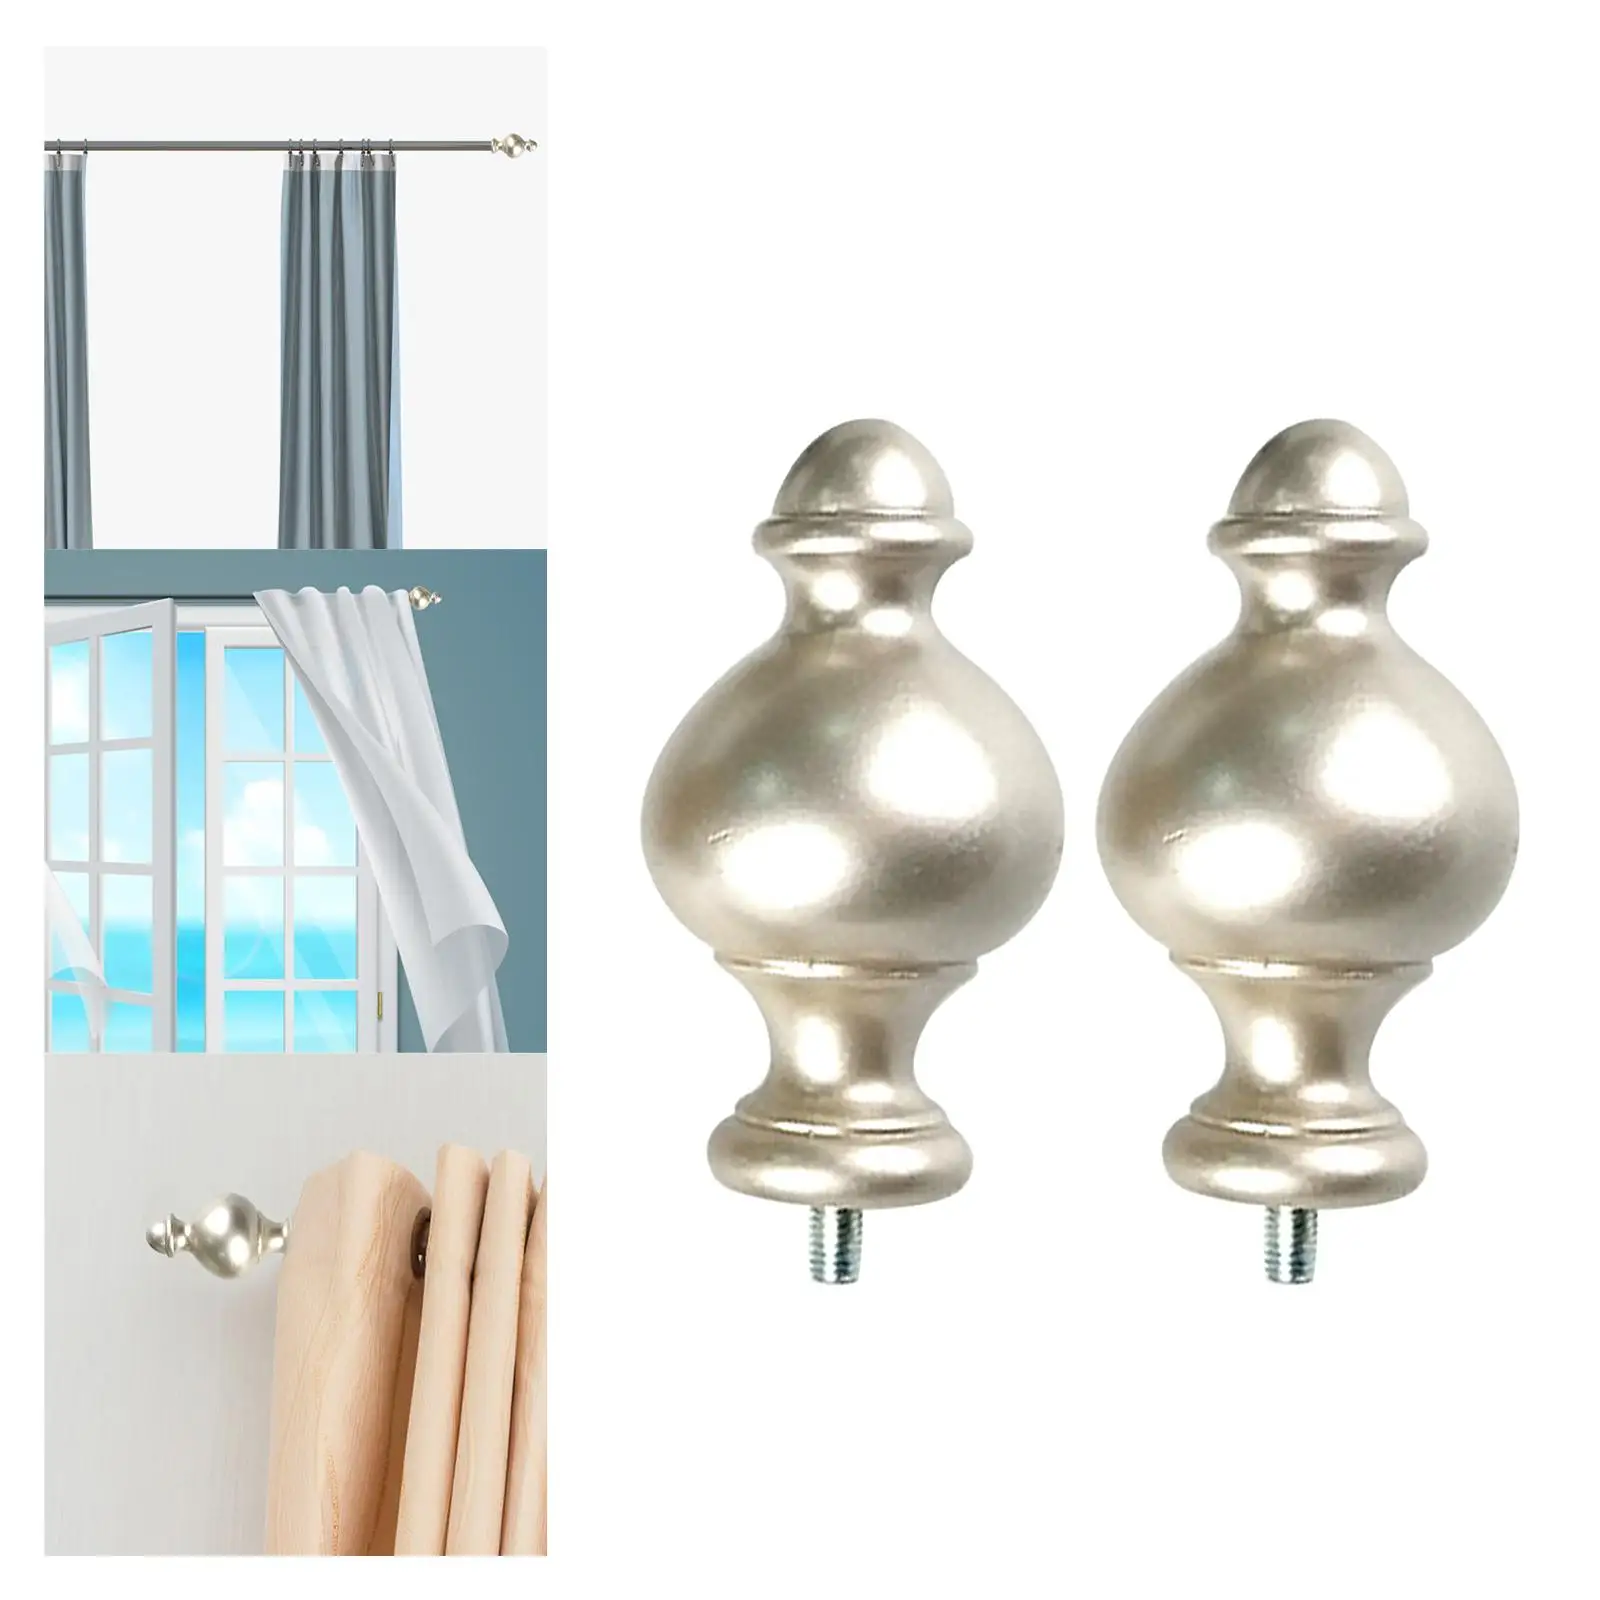 2 Pieces Curtain Rod Finials 9/16 Inch Diameter Replacement for Living Room